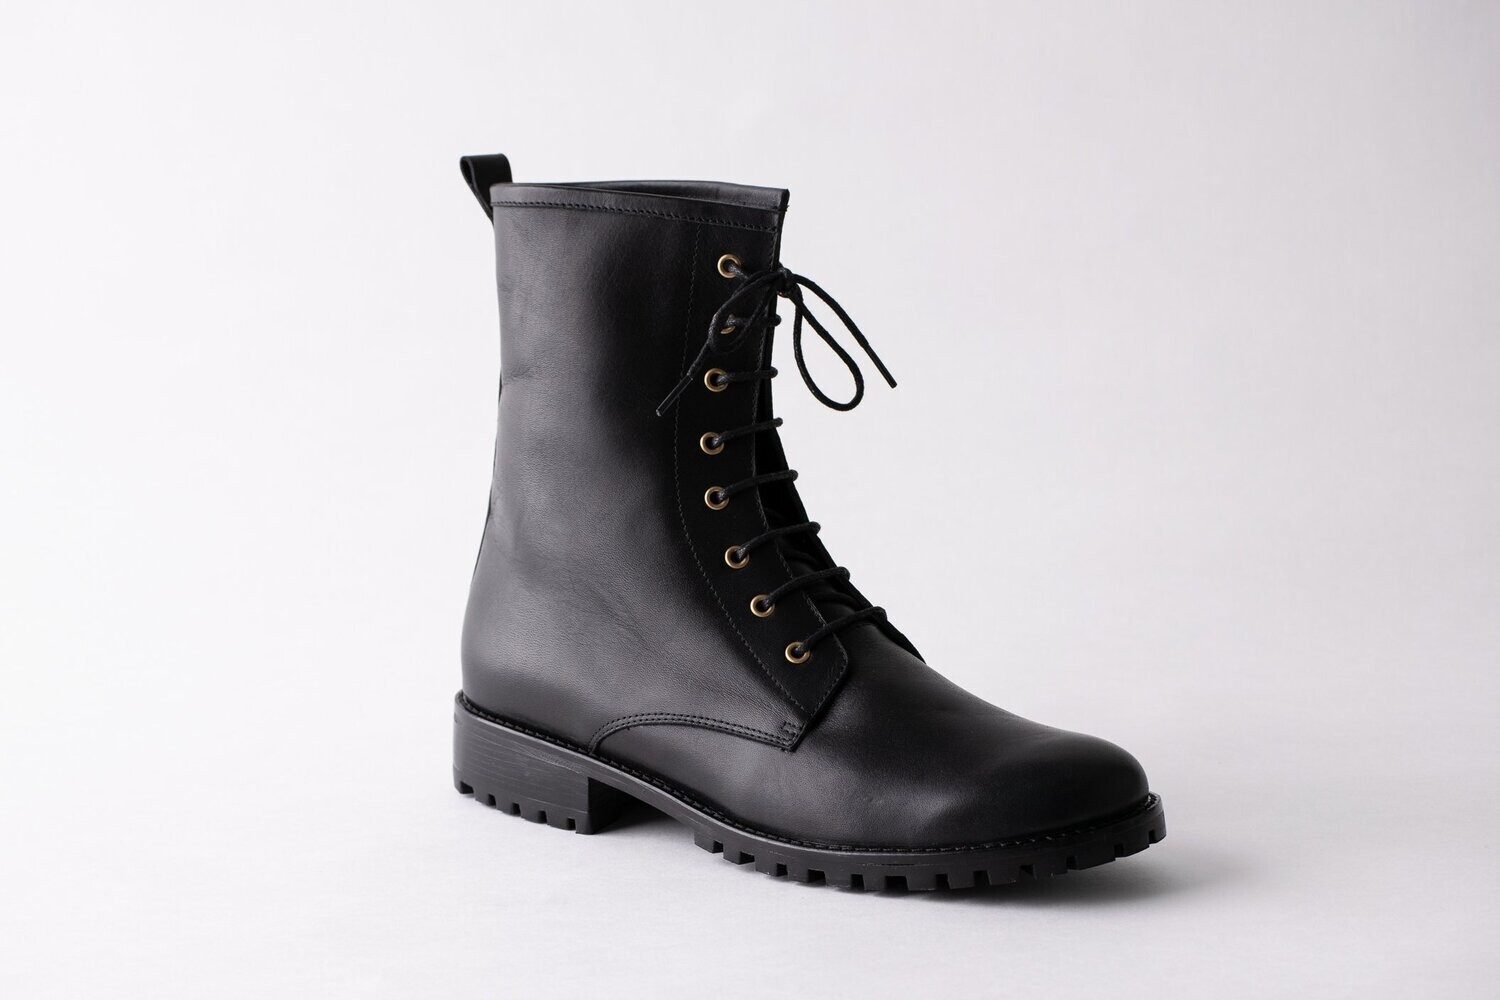 FI - LILY PAIGE COMBAT BOOT